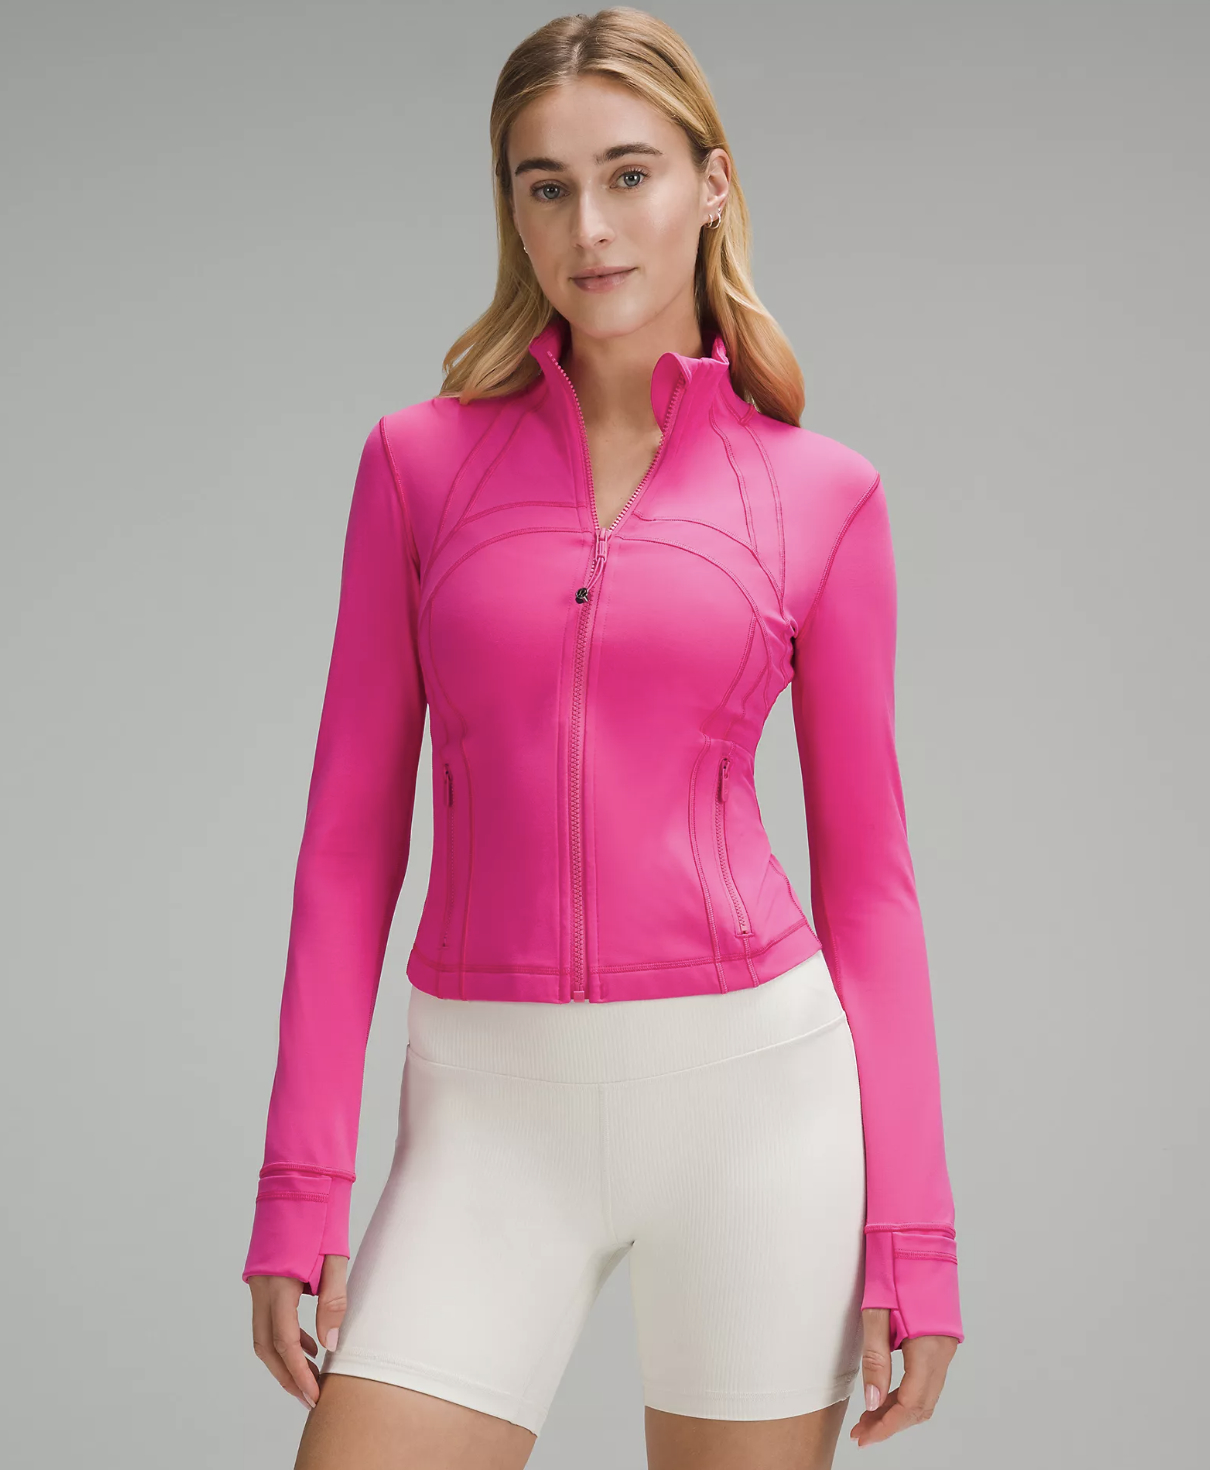 model in the pink jacket